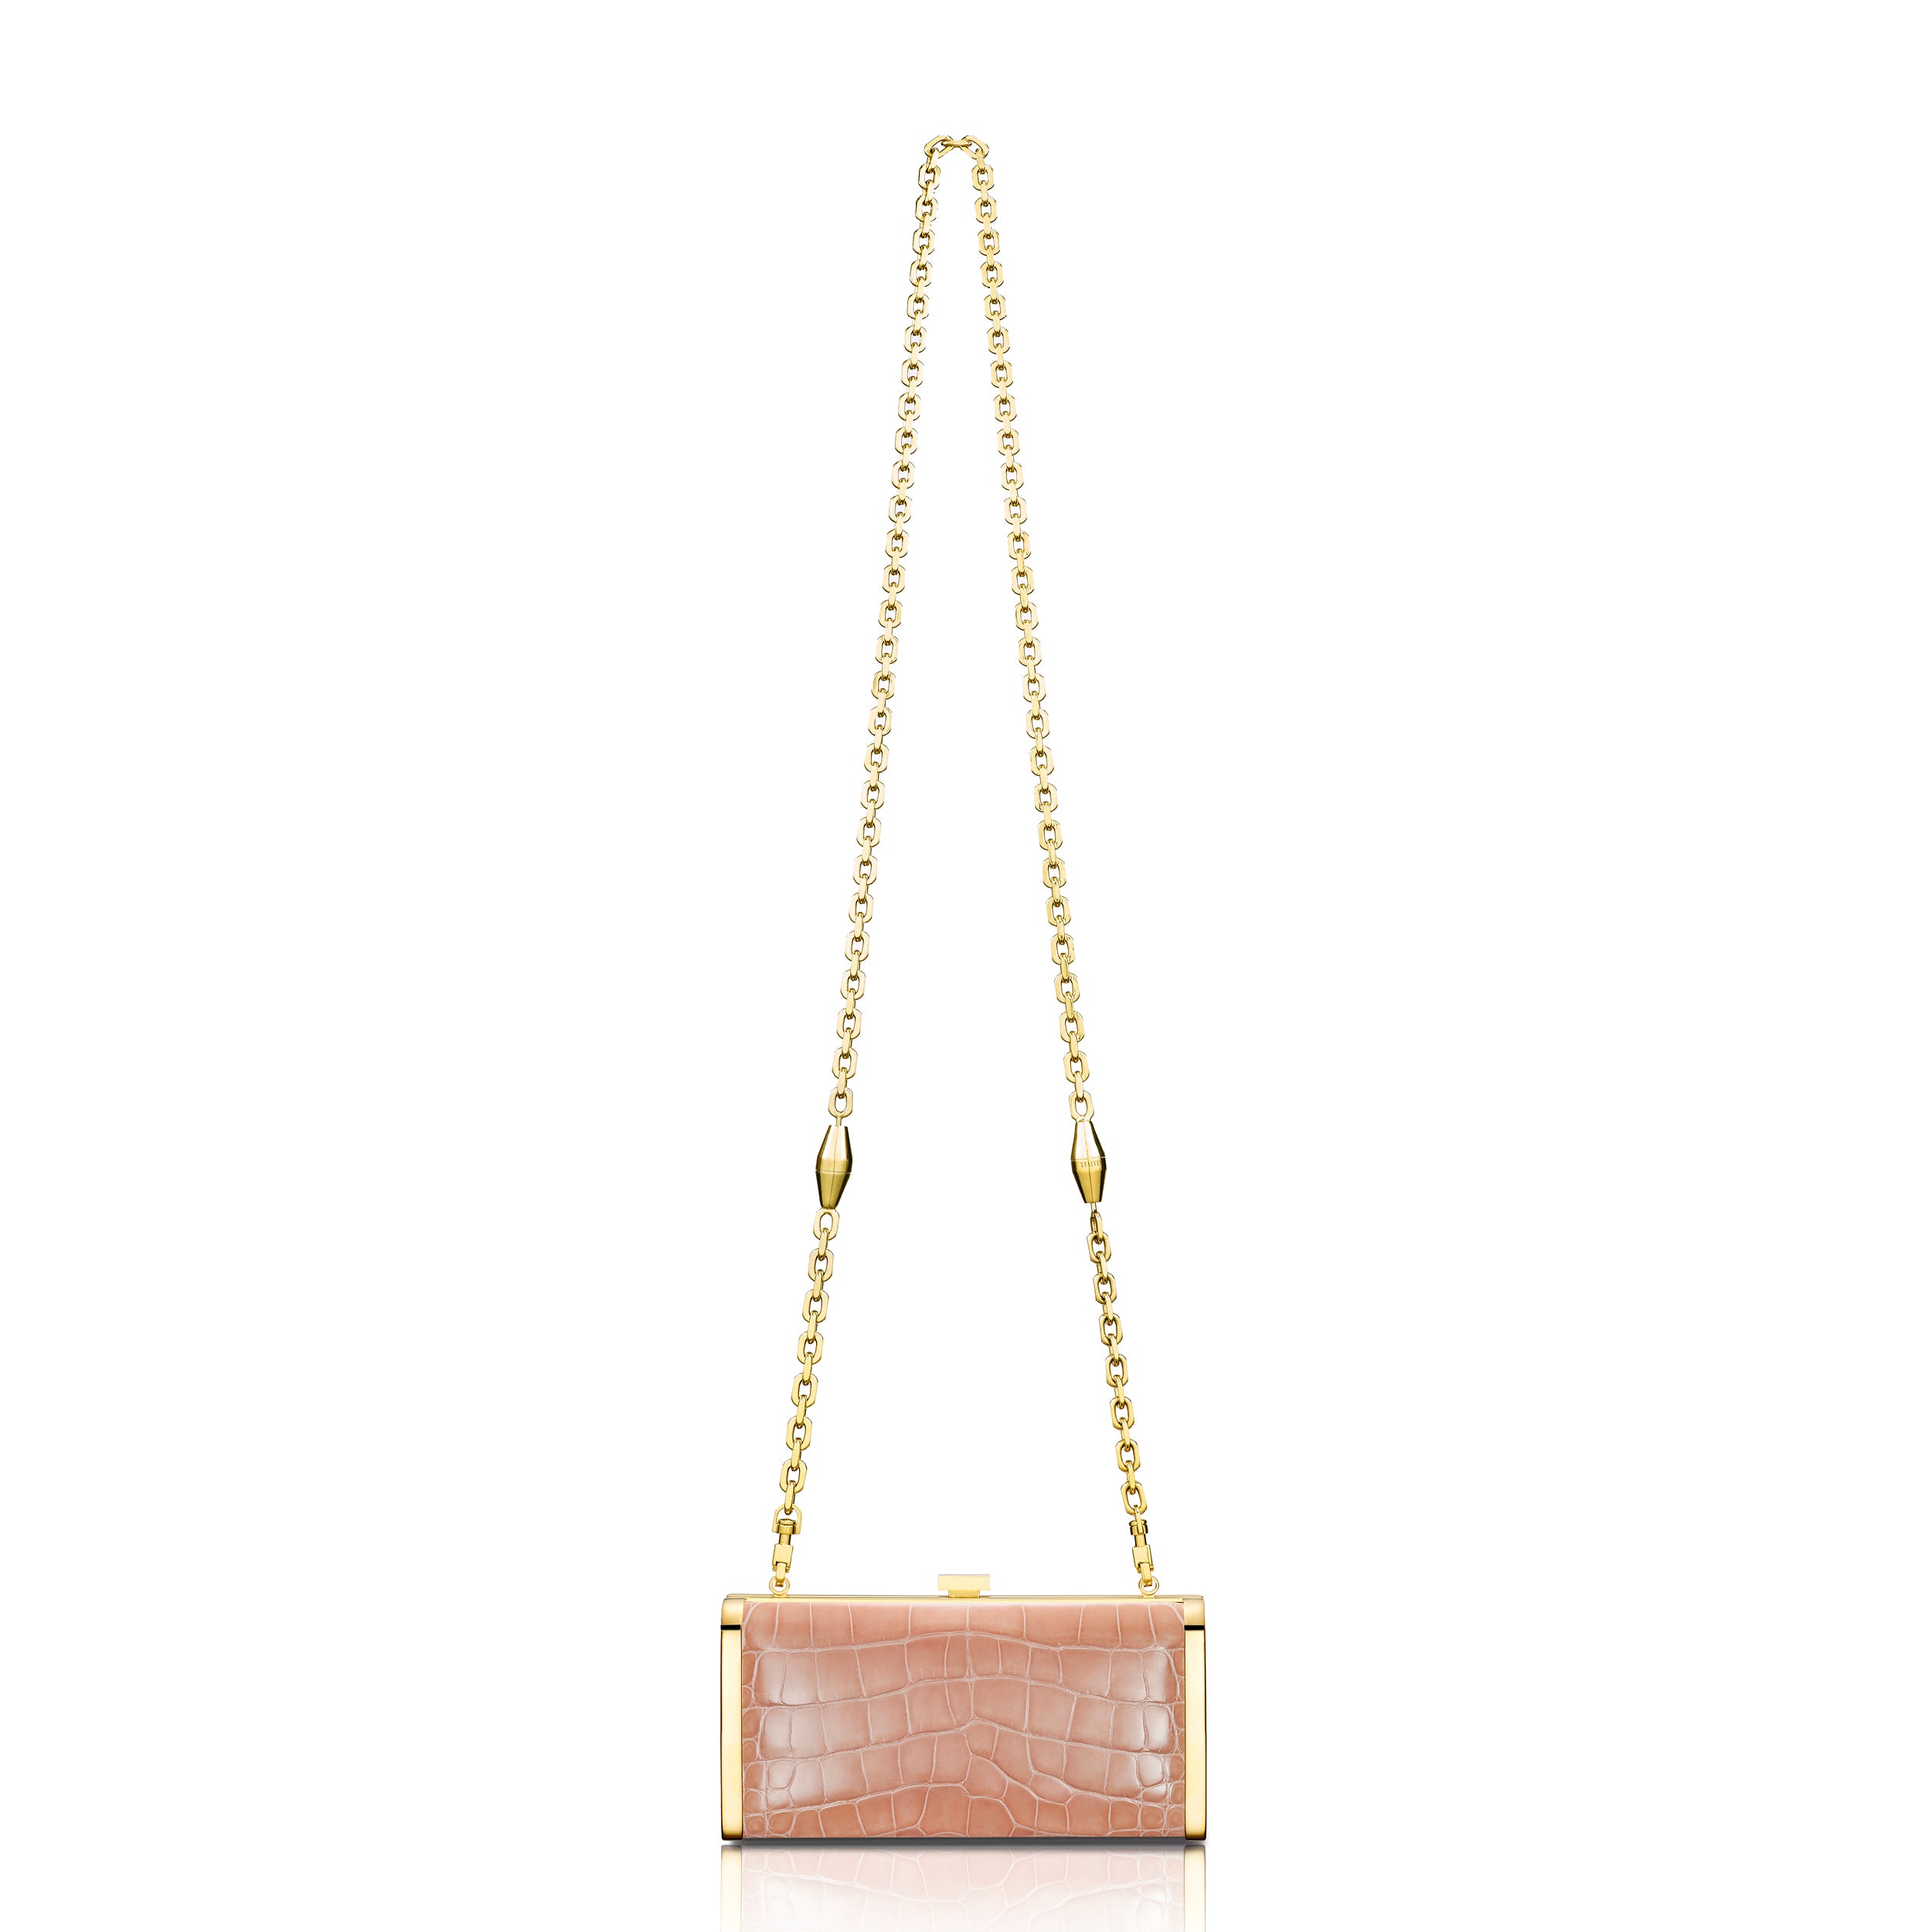 STALVEY Square Clutch in Powder Pink Alligator with 24kt Gold Hardware Back View with Chain